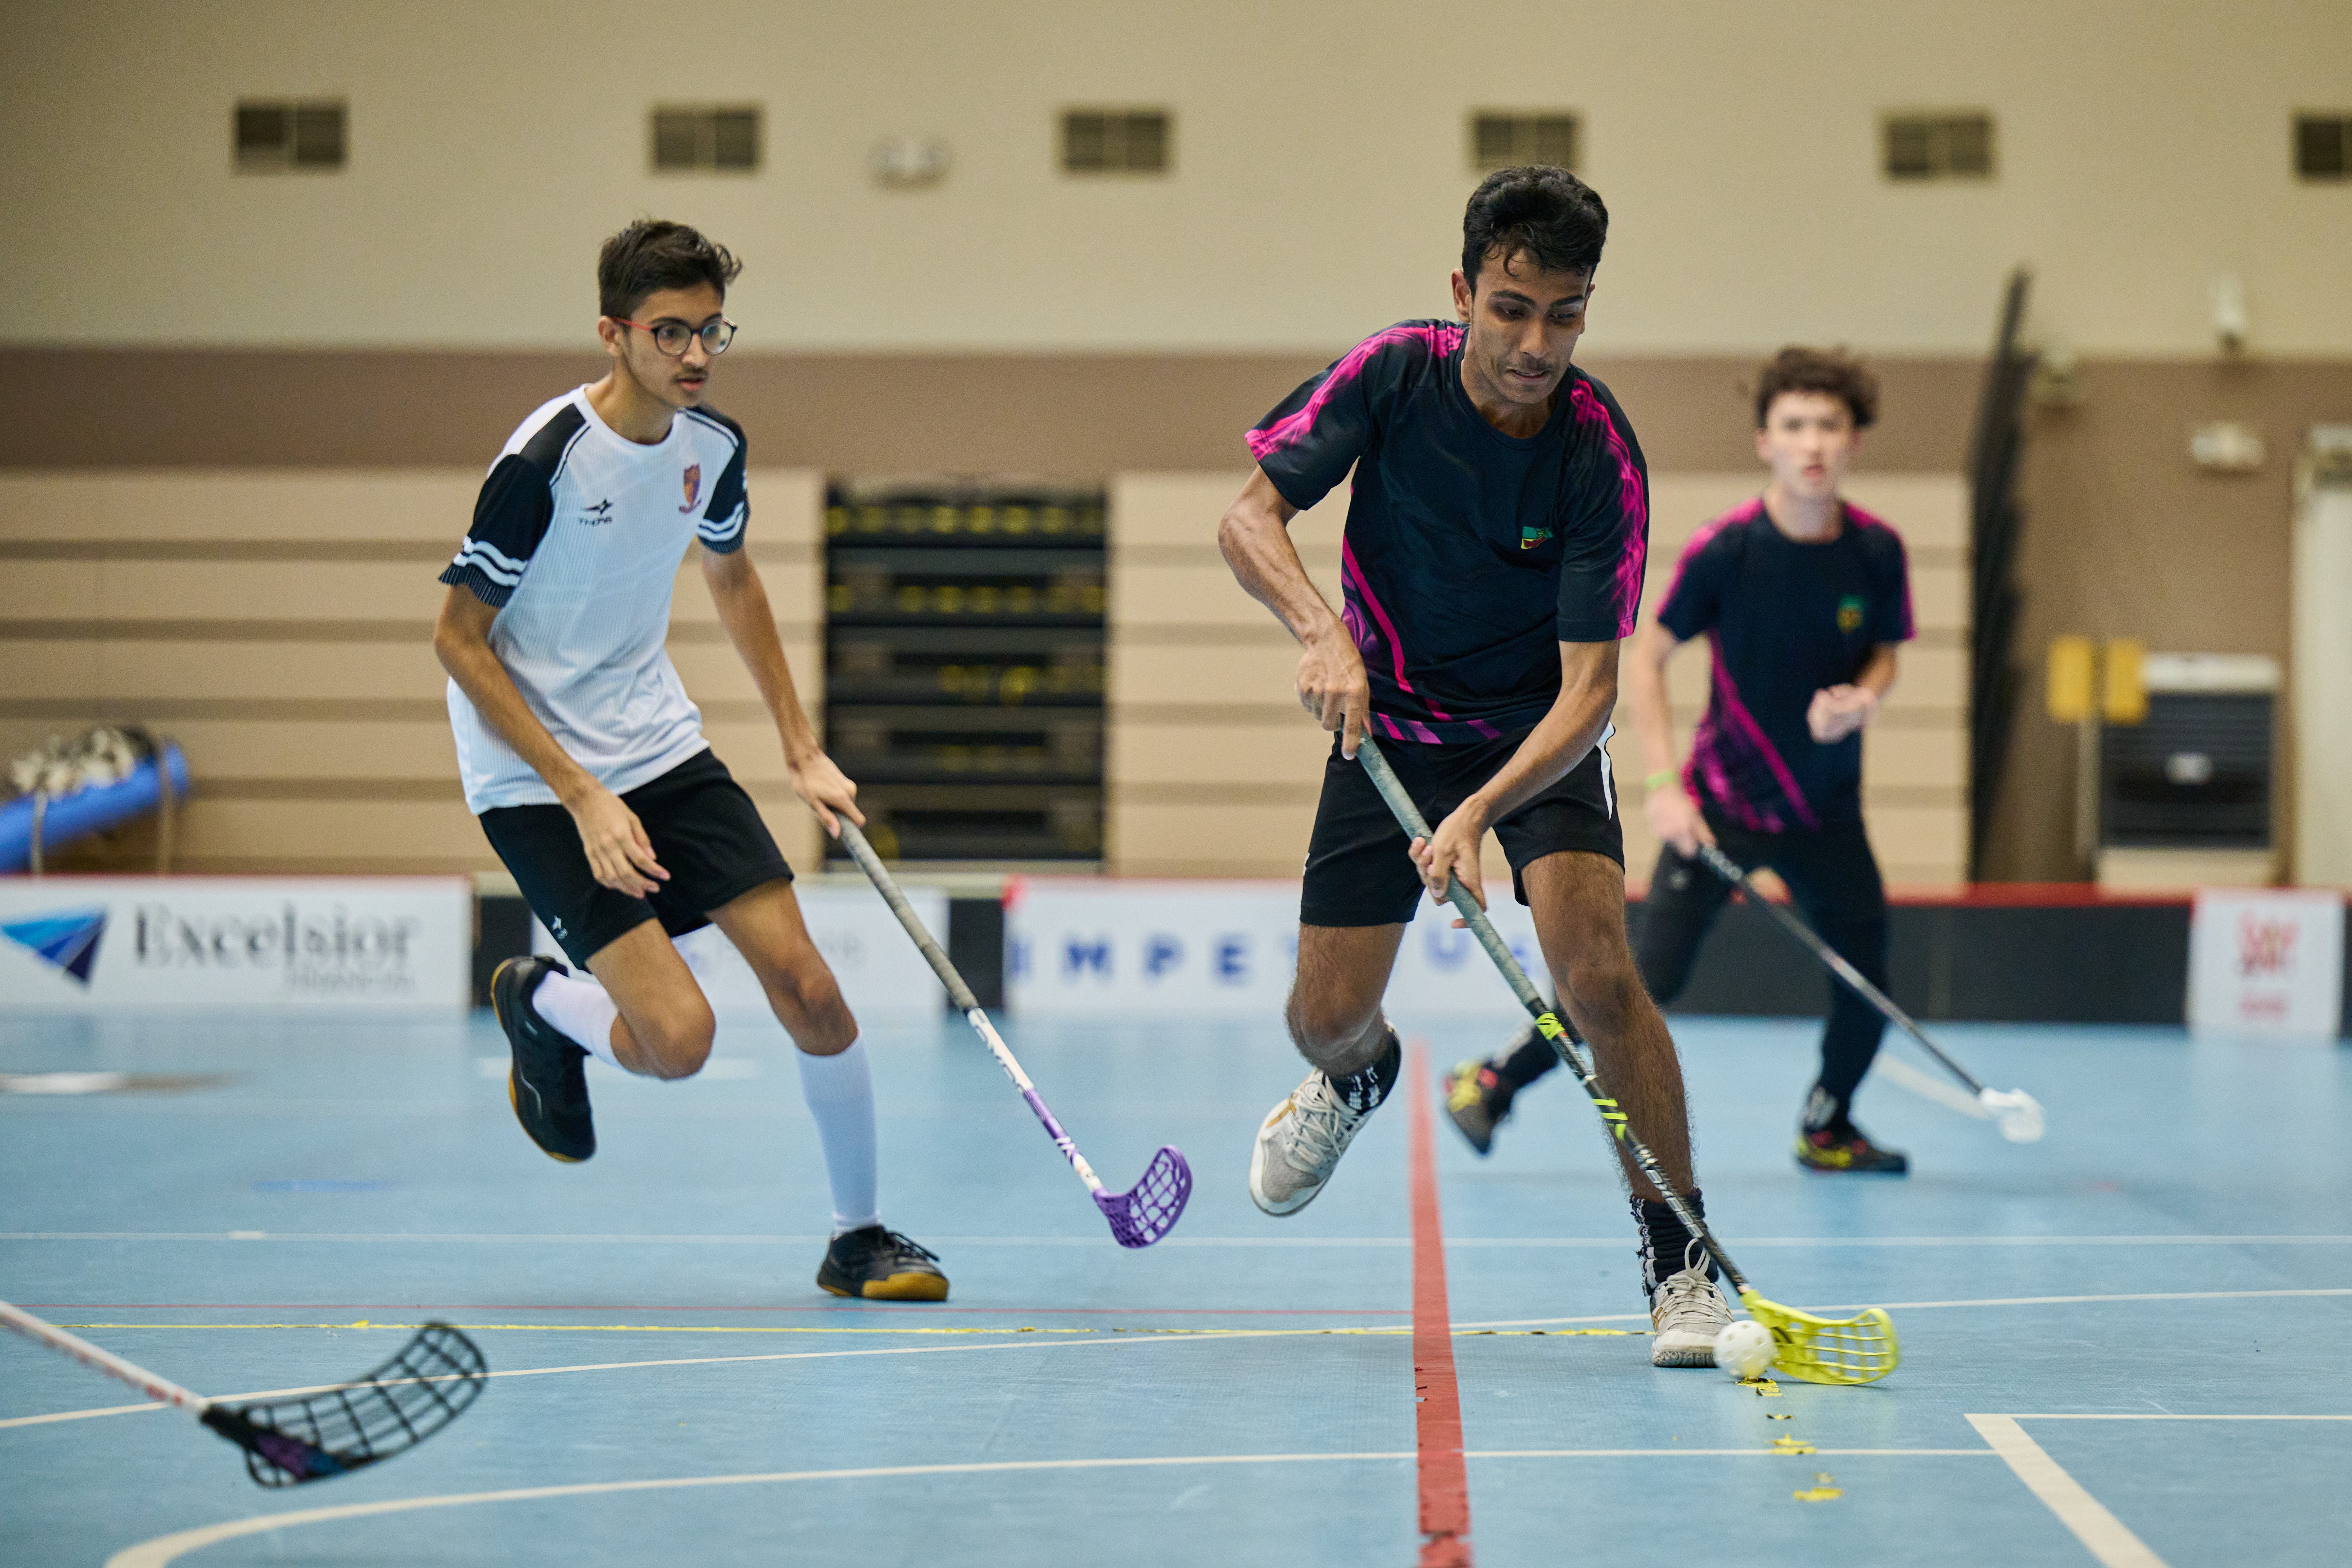 20220519_20220519 SSSC Floorball National A Div Boys Semi Finals Raffles Junior College Vs Anglo-Chinese Junior College_Siaw Woon Chong_0038